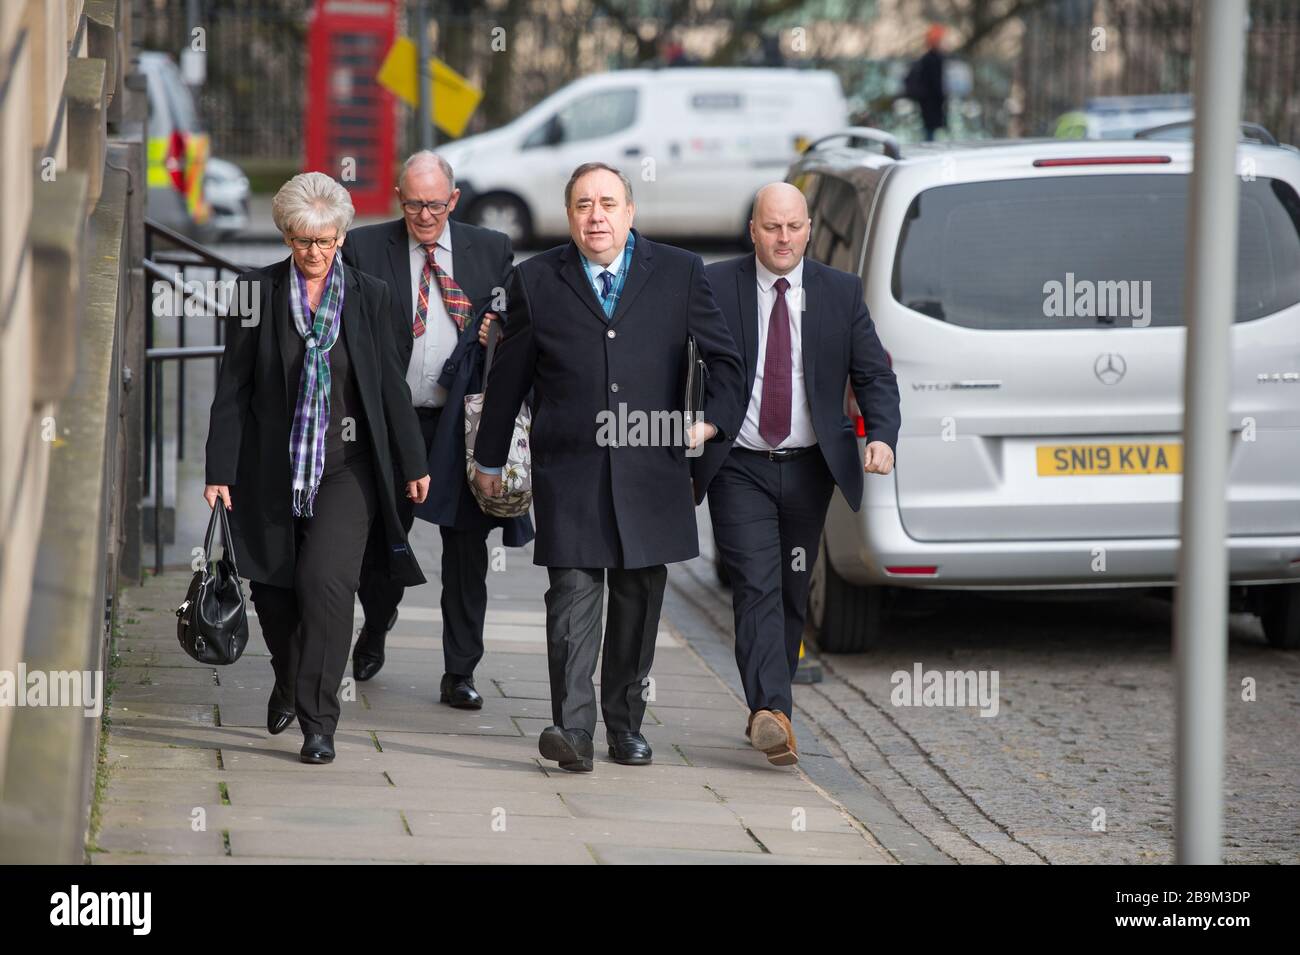 Edinburgh, UK. 23 March 2020.   Pictured: Alex Salmond - Former First Minister of Scotland and Former Leader of the Scottish National Party (SNP).   Alex Salmond is seen arriving at the High Court on day eleven of his trial, where the Jury are expected to return a verdict later today. Stock Photo